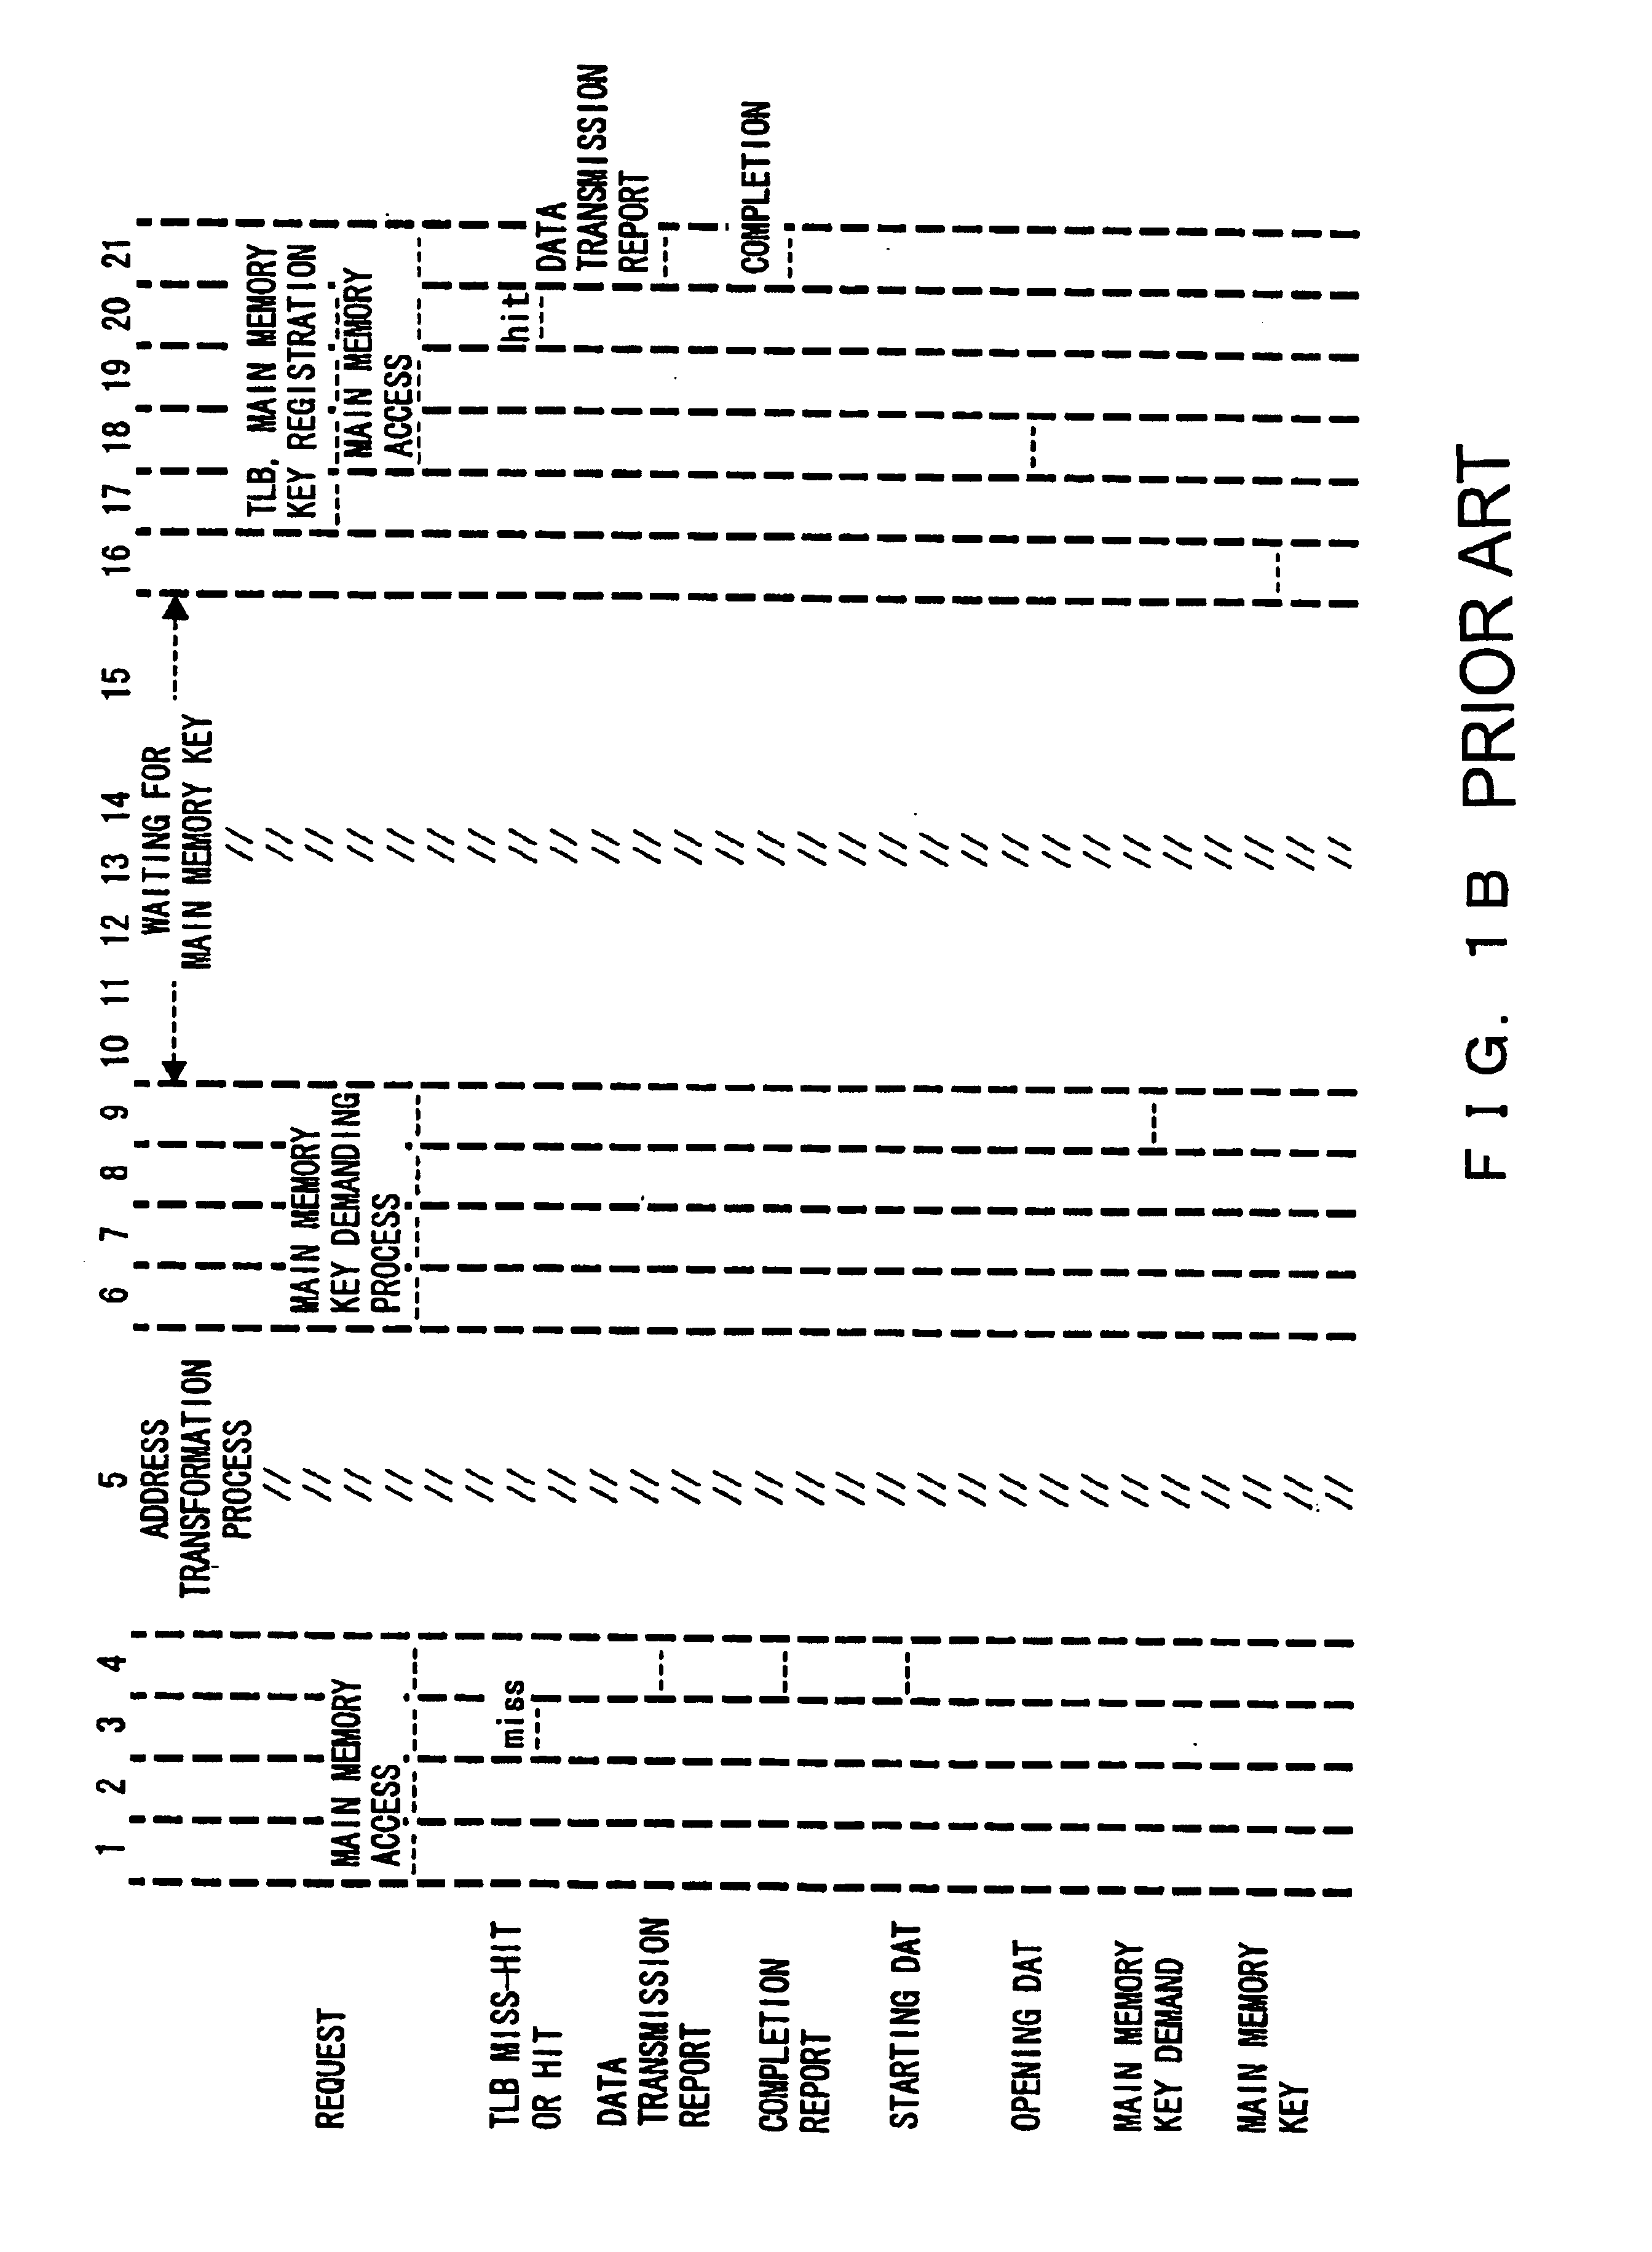 Cache control device and method with TLB search before key receipt